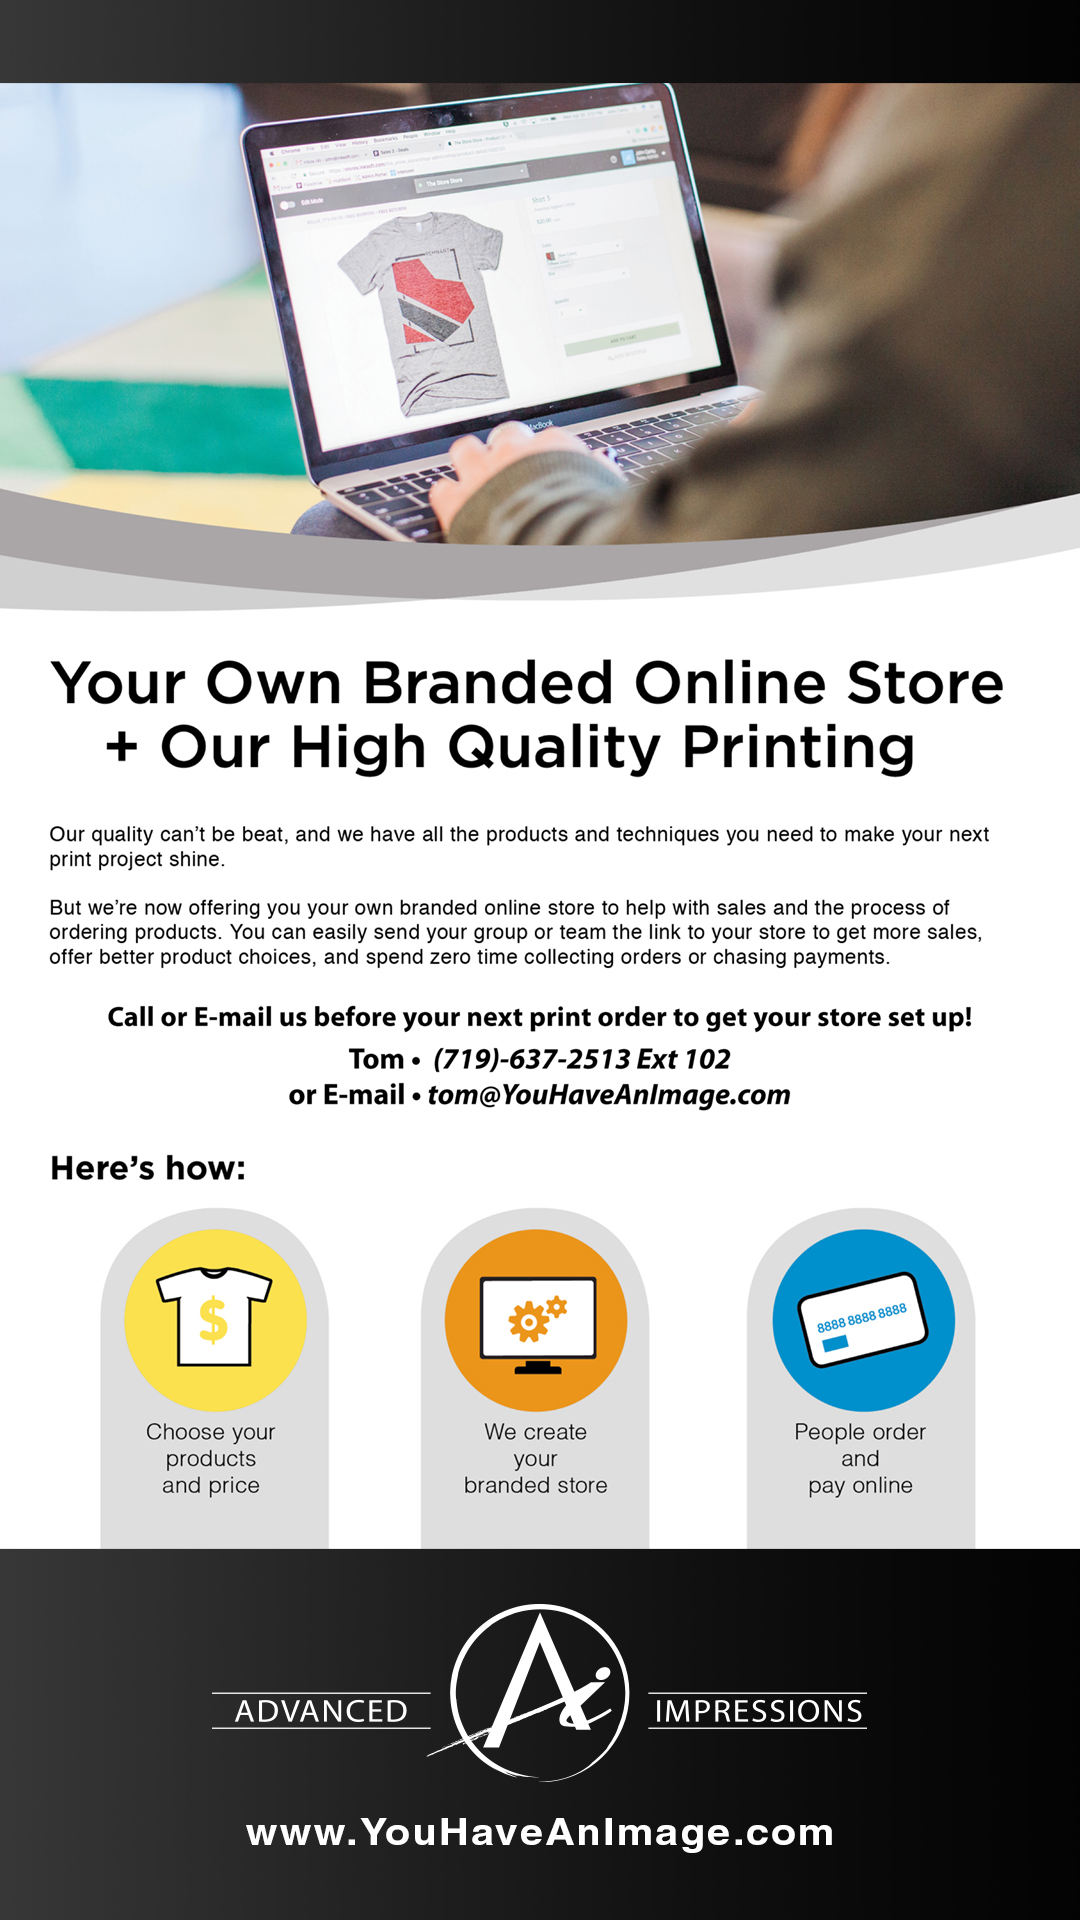 Start Your Own Online Store